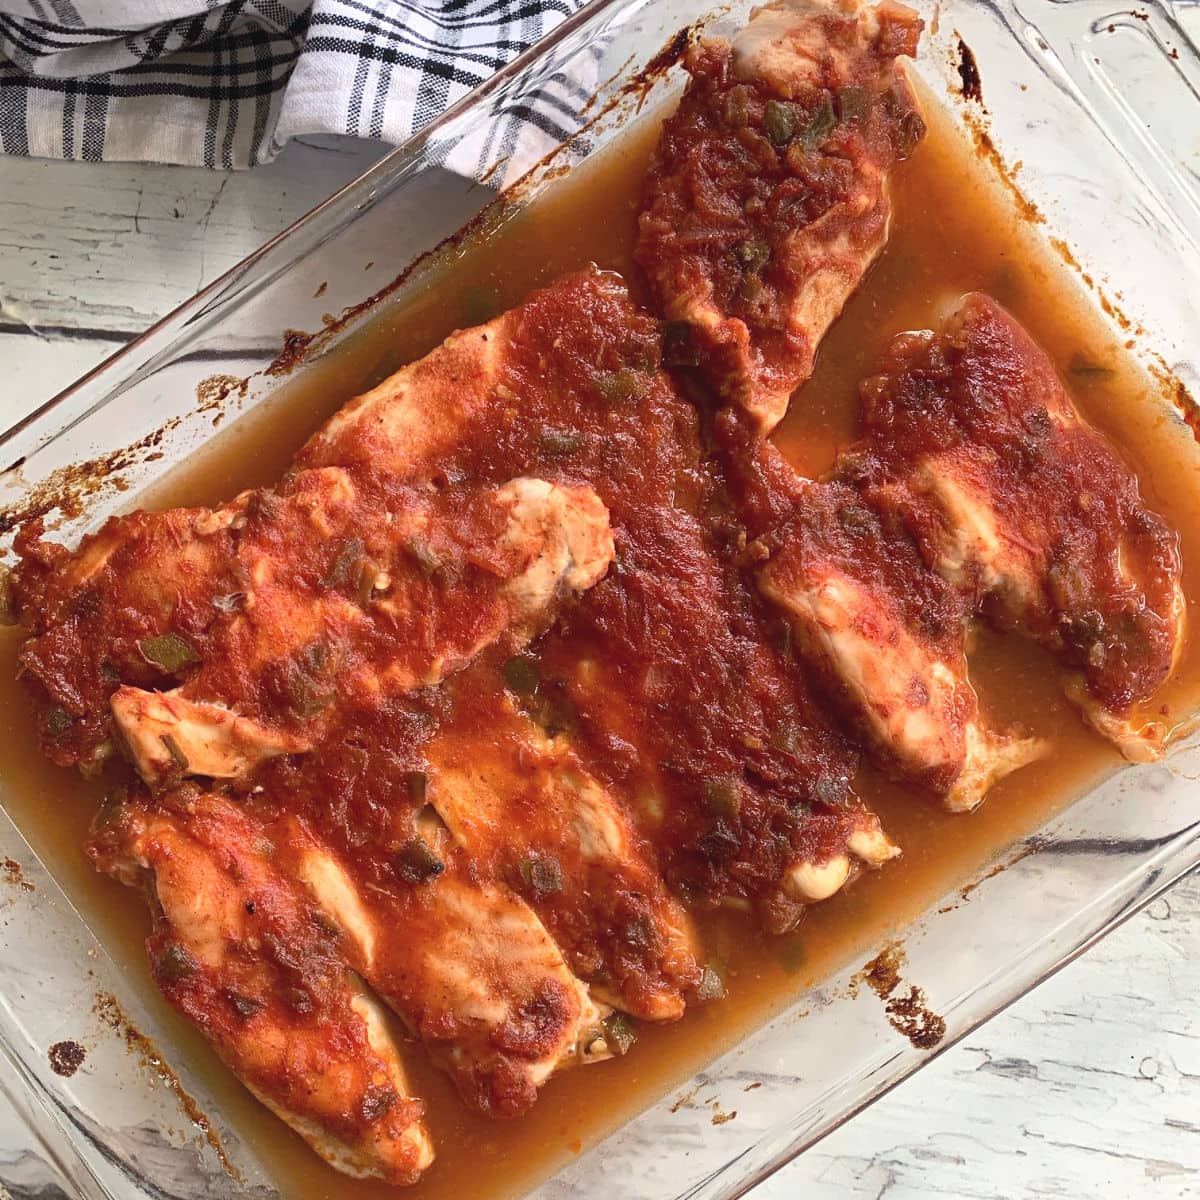 Chicken breasts in a glass baking pan.